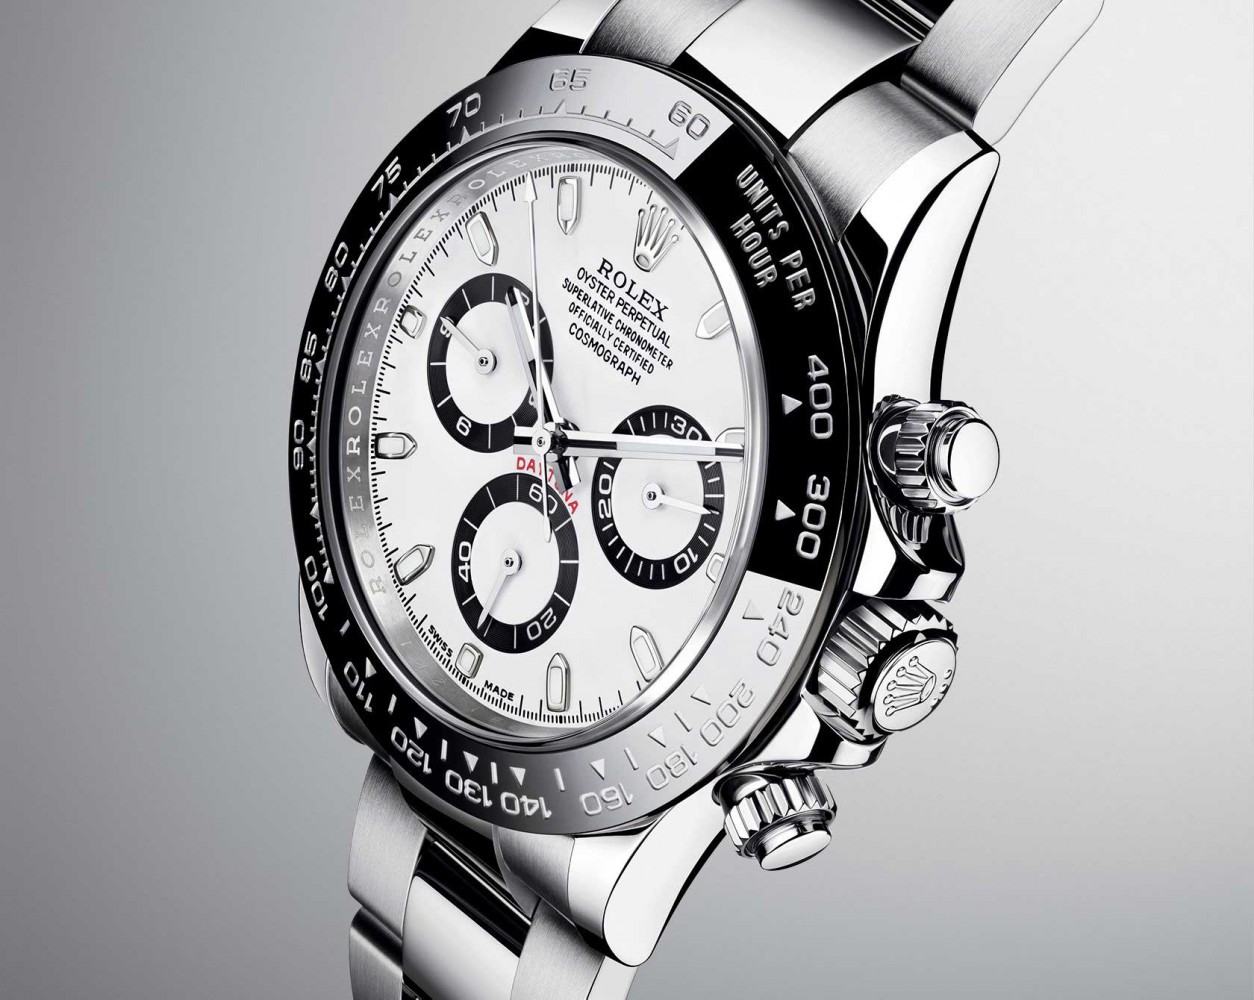 Rolex Oyster Perpetual Cosmograph Daytona with a black Cerachrom bezel